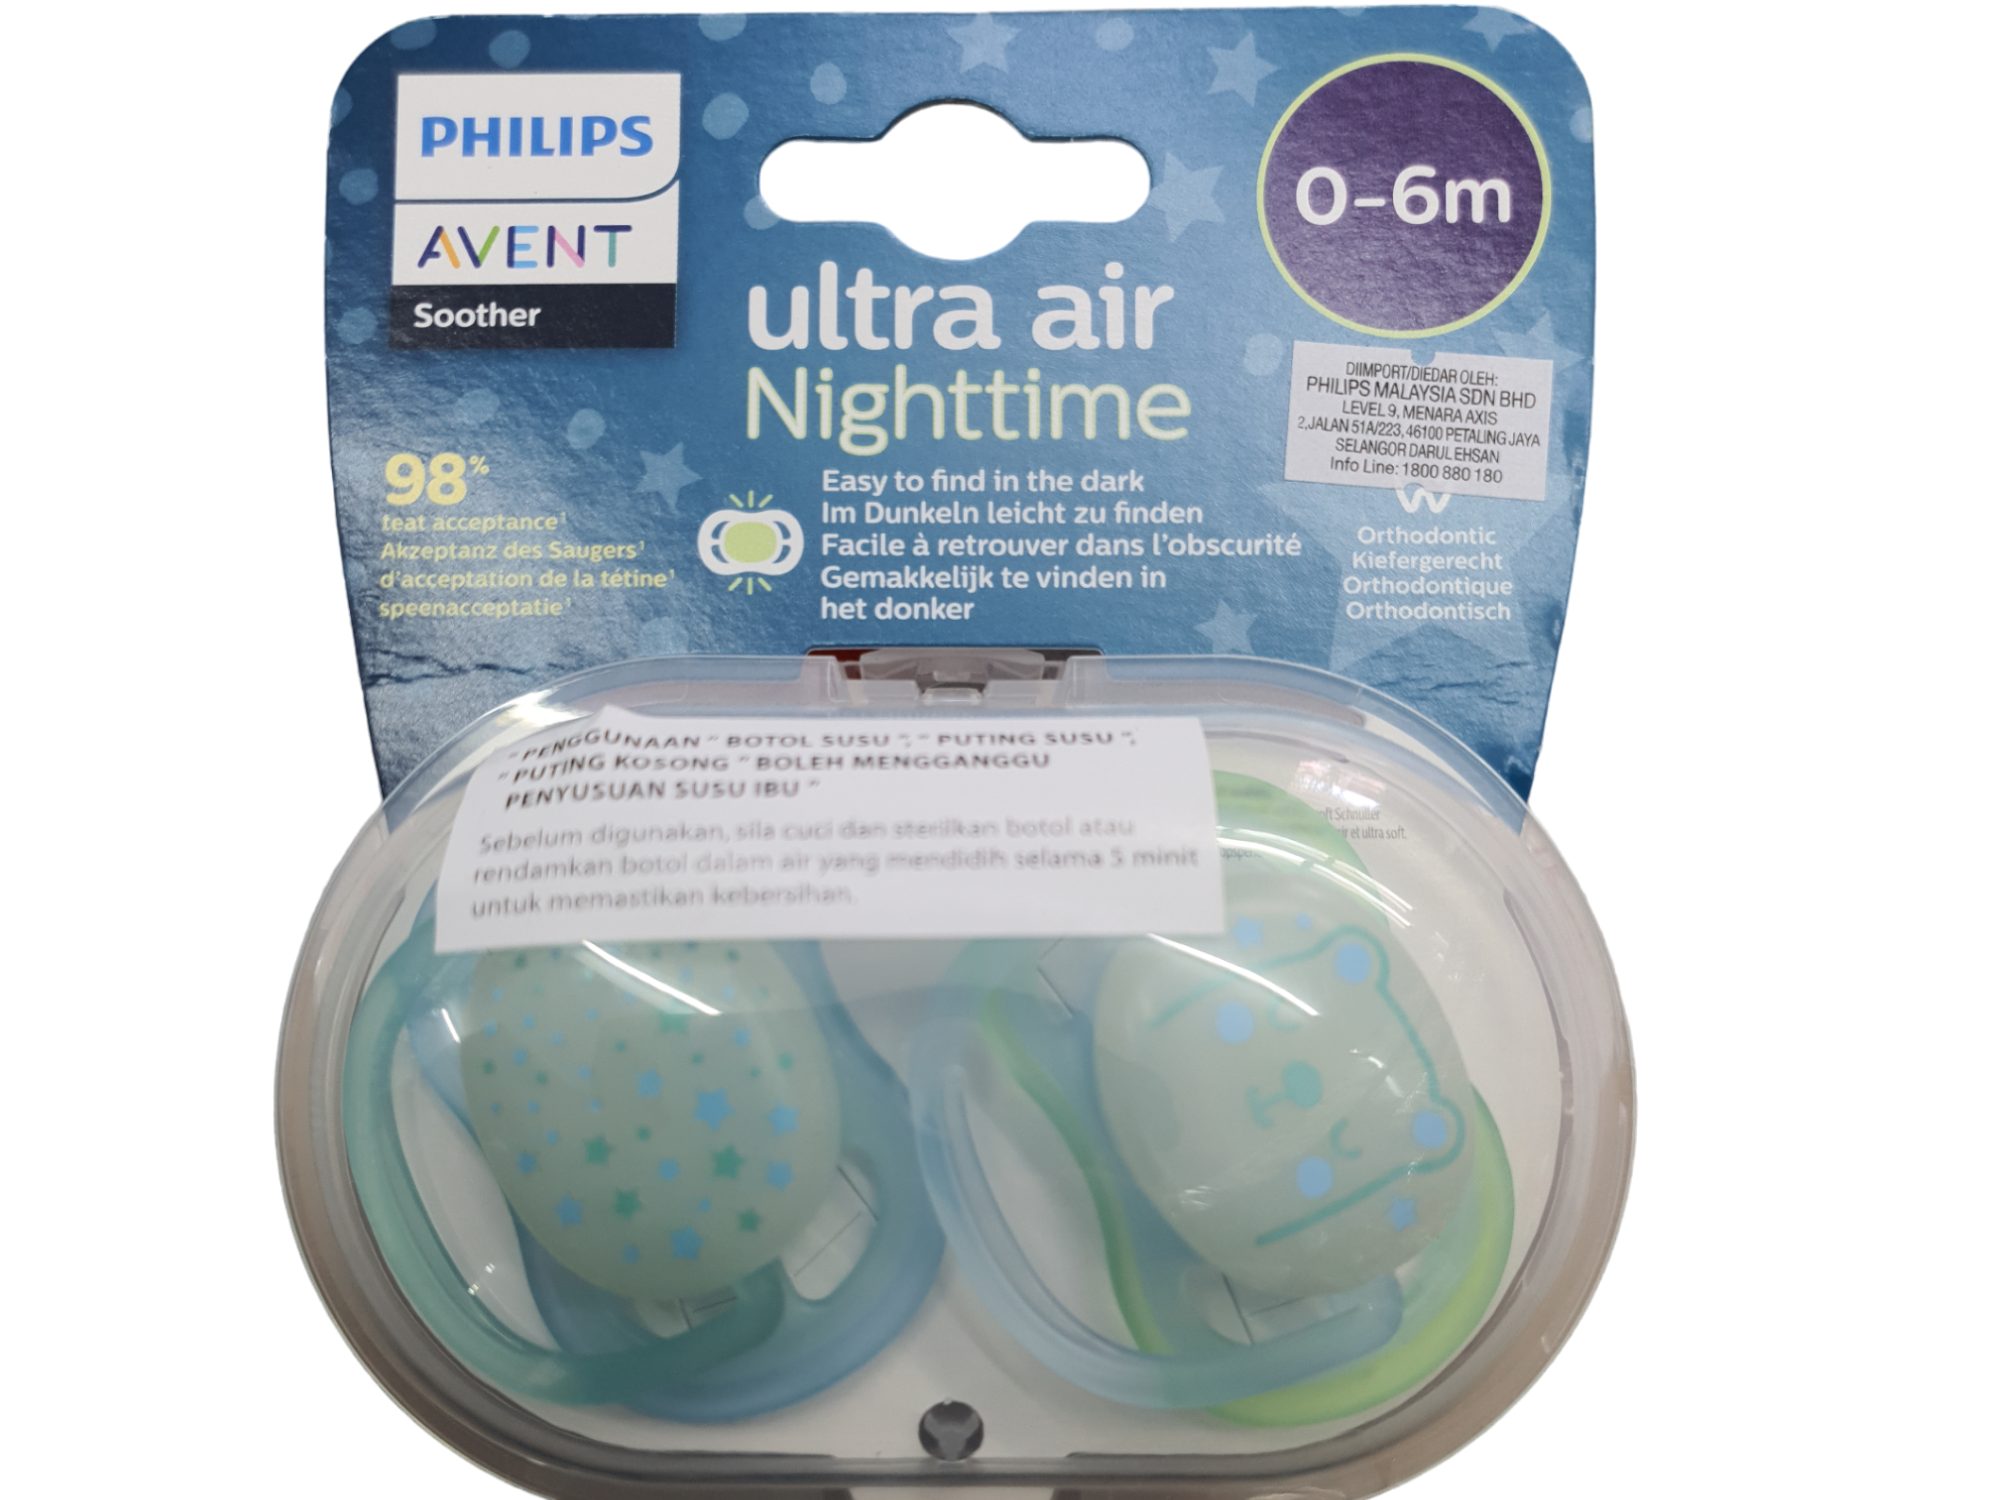 Philips Avent Soother Ultra Air Nighttime 0-6m+